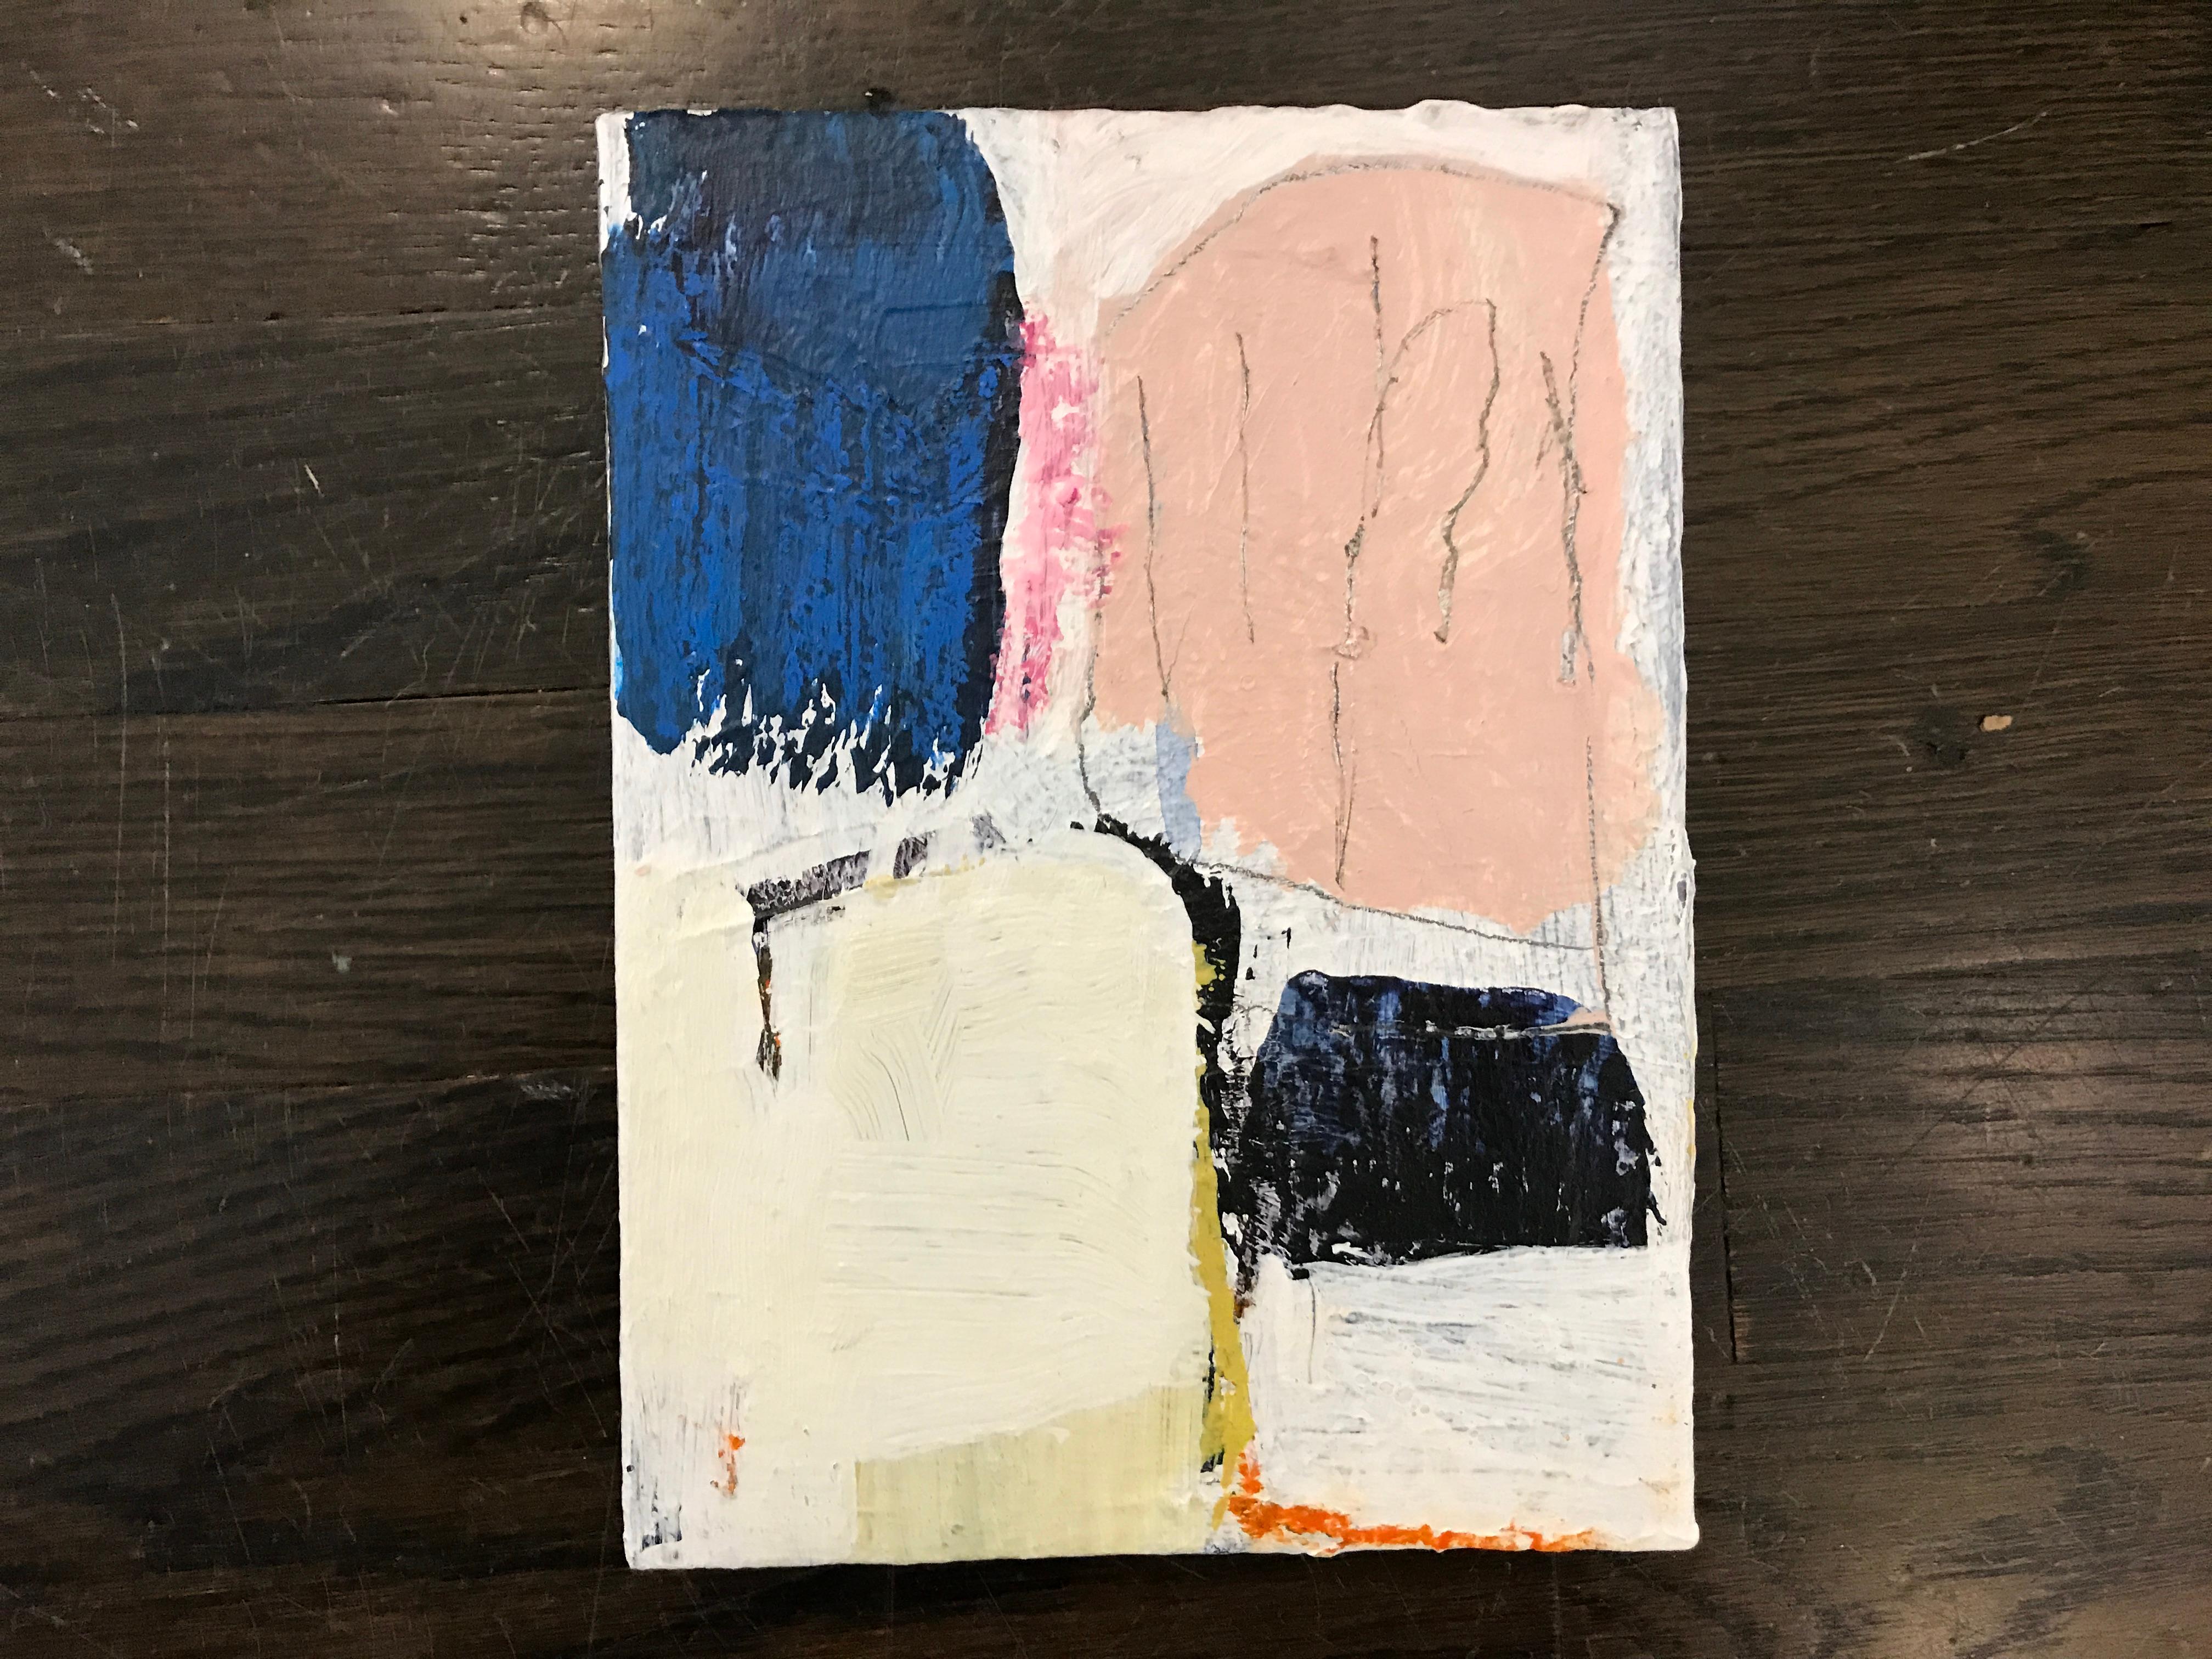 Affinity by Ellen Rolli, 2018, Petite Gift-able Abstract Painting 1